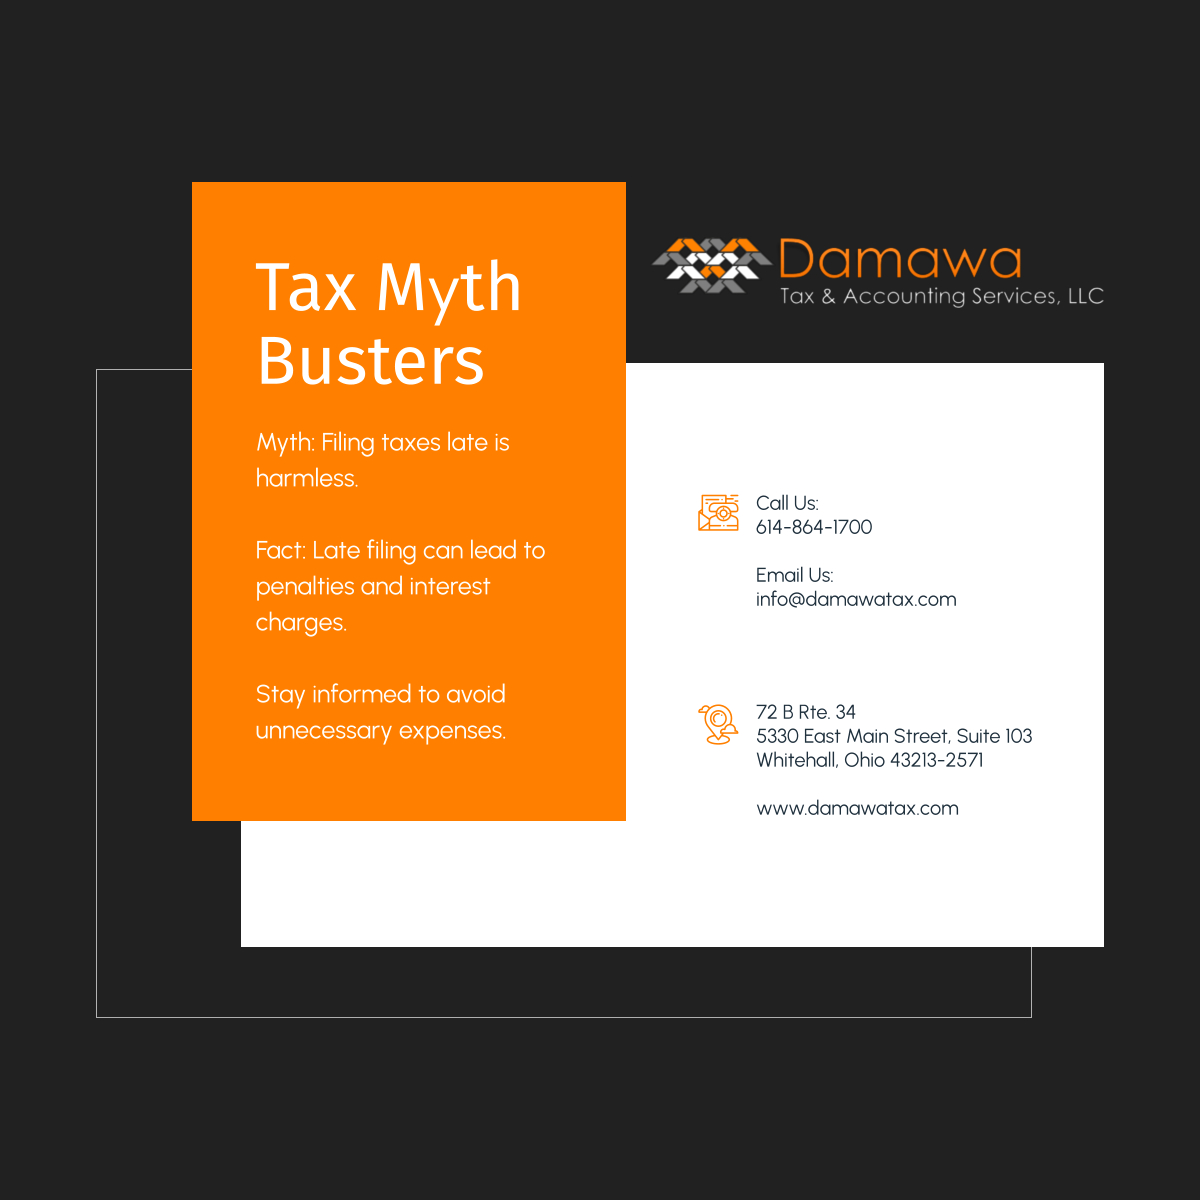 Don't fall for tax myths. Late filing can lead to penalties and interest charges. Stay informed to avoid unnecessary expenses. 

#WhitehallCityOhio #TaxServices #TaxMyths